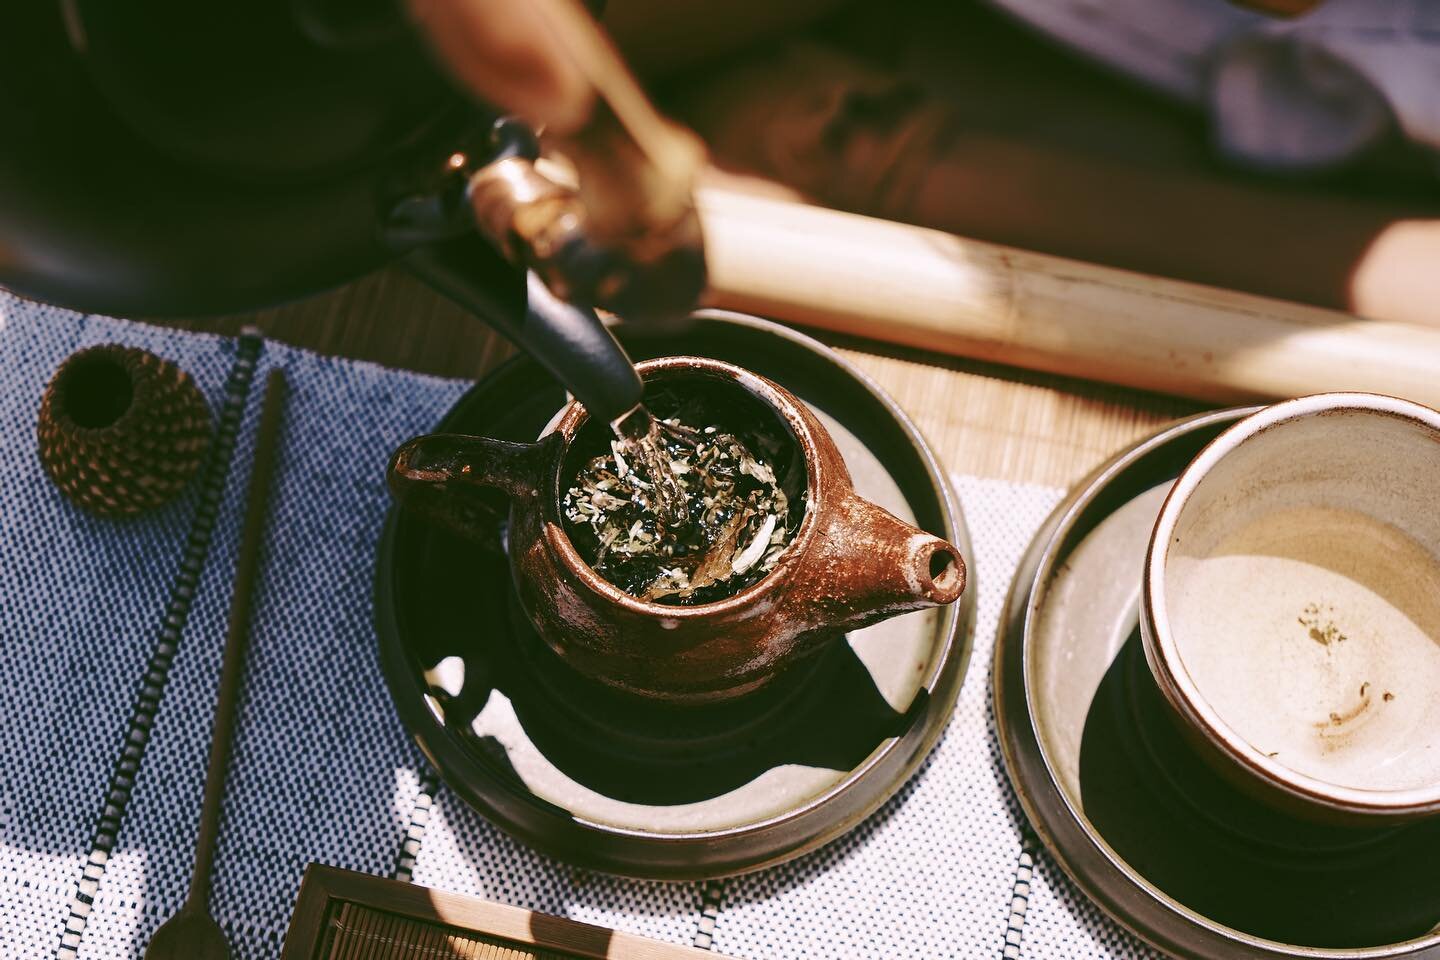 A beautiful Gongfu cha ritual with our nourishing Elysian Bai Cha, a tea blessing us with the grace of the element of Water. 💧
.
Registration for the Way of Tea course online platform are about to open. We are finalizing the last details, to open th